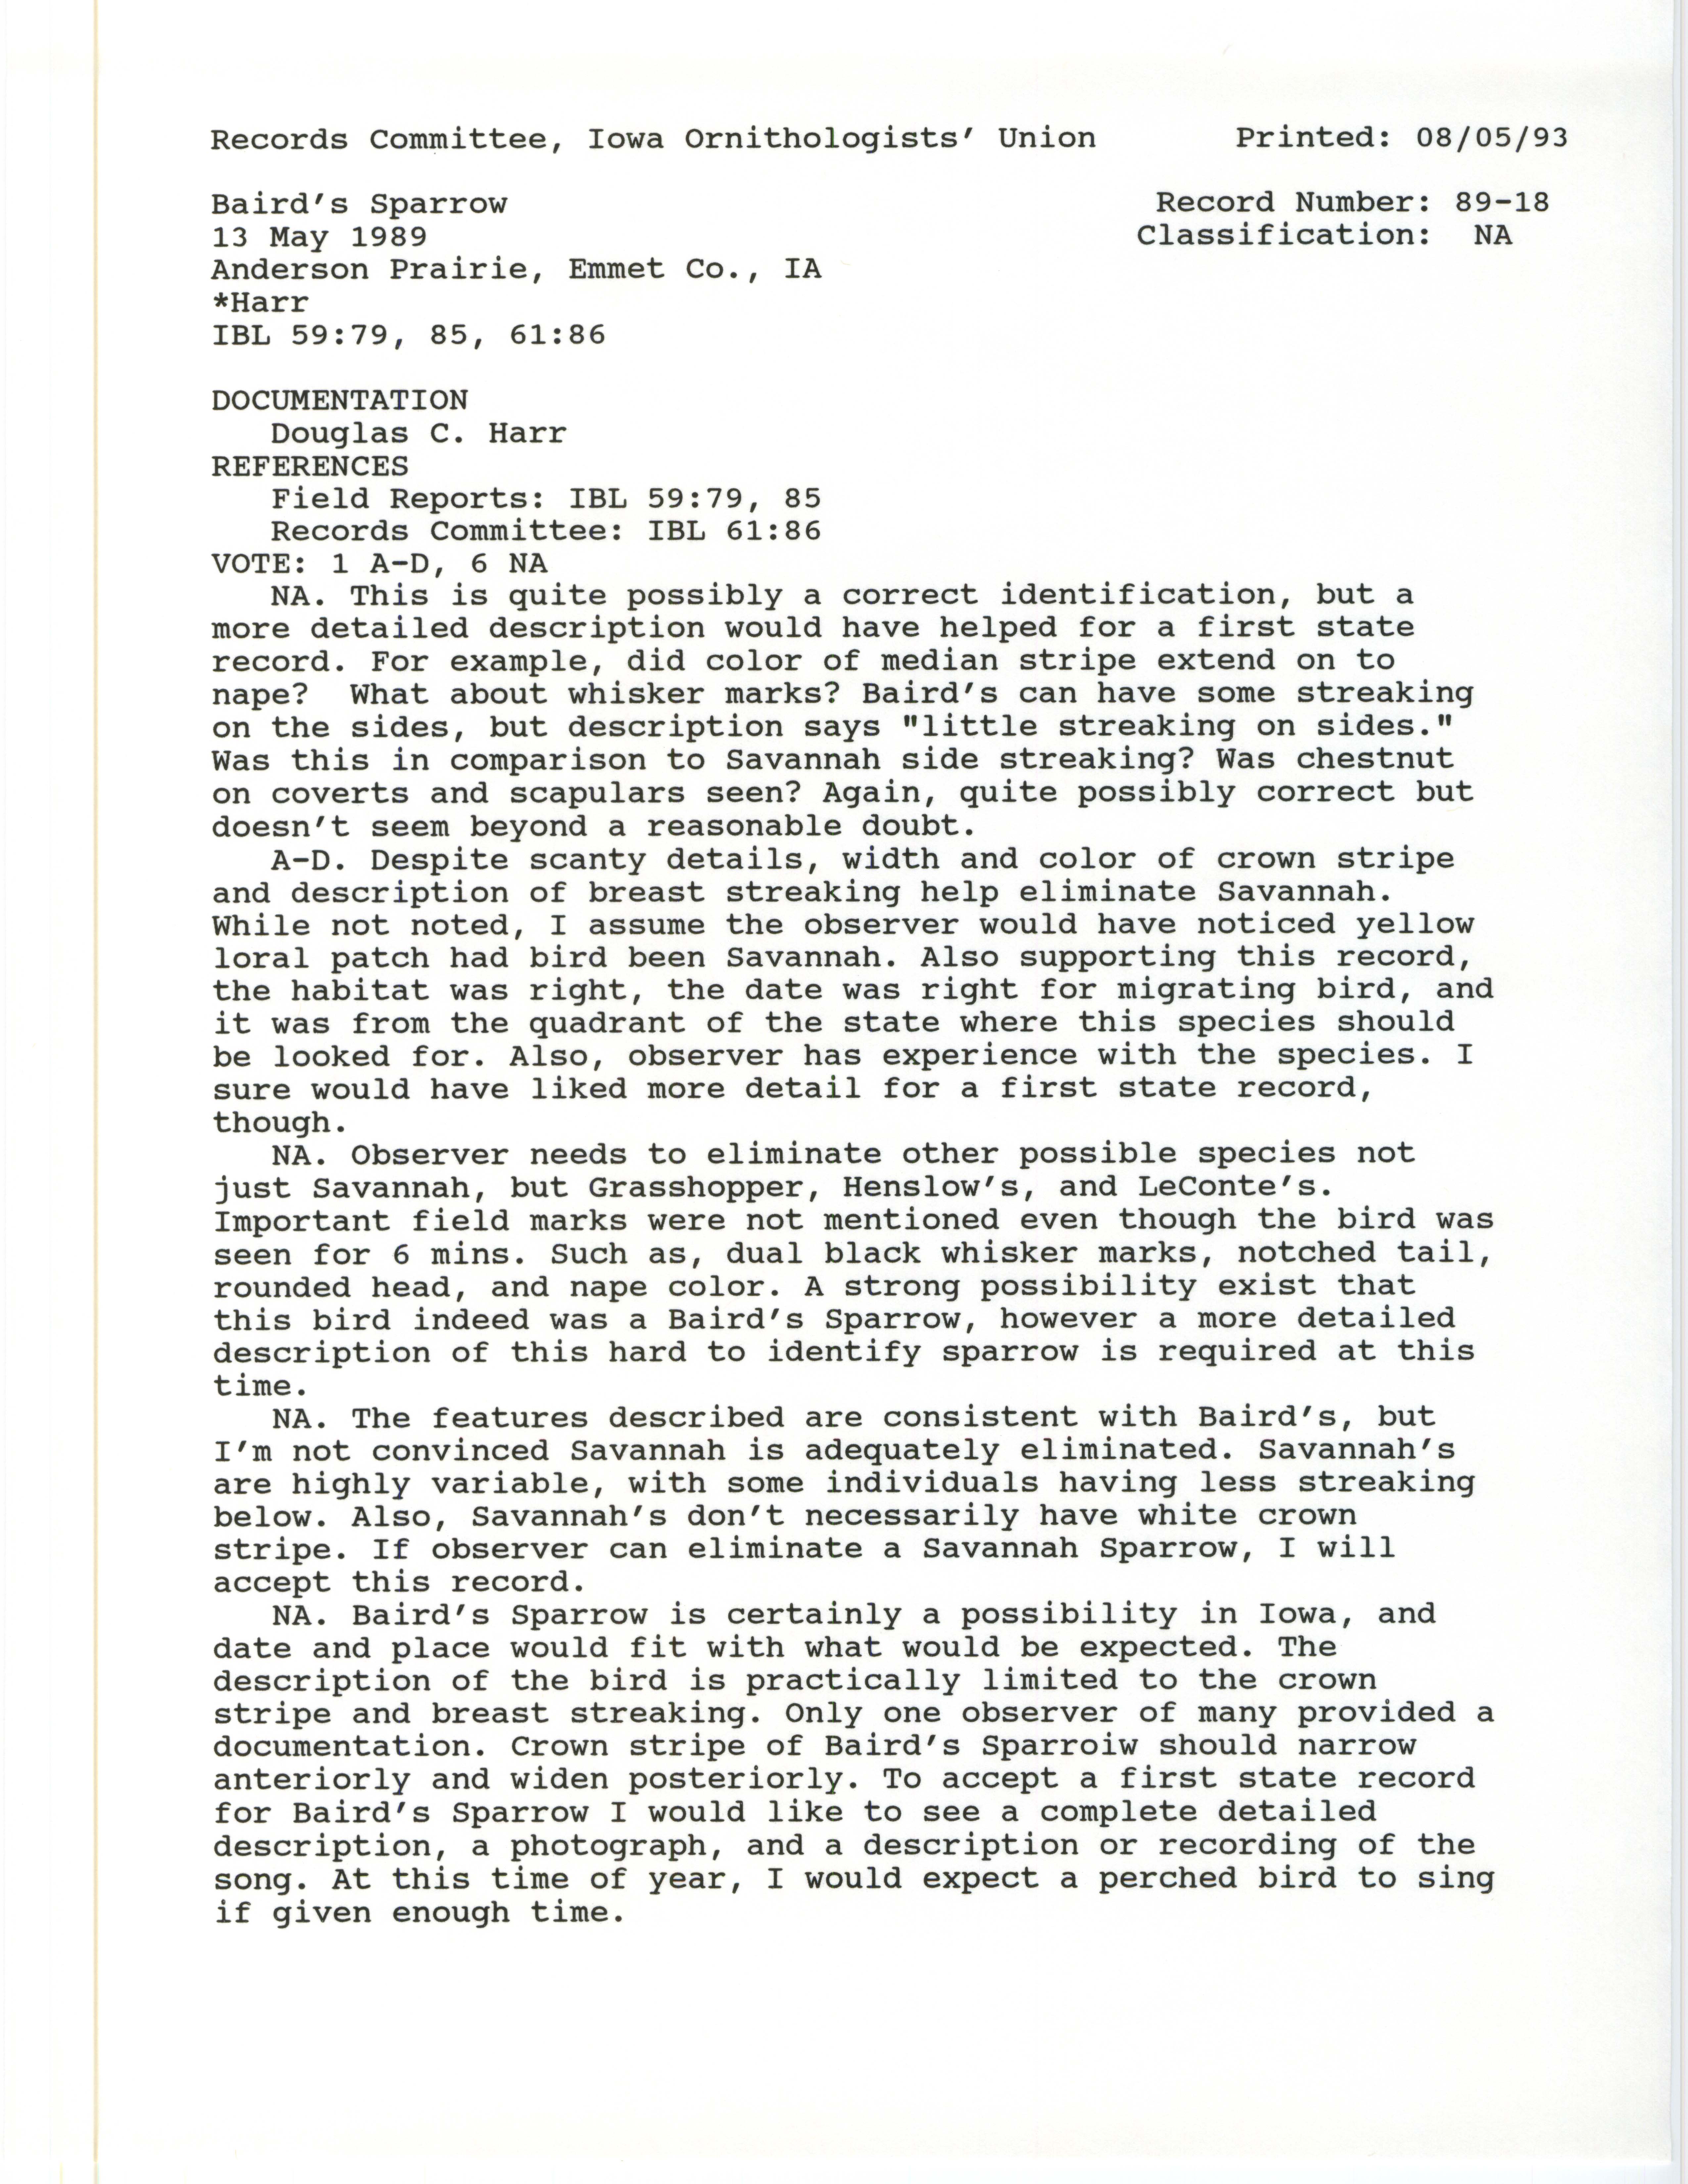 Records Committee review for rare bird sighting for Baird's Sparrow at Anderson Prairie State Preserve, 1989